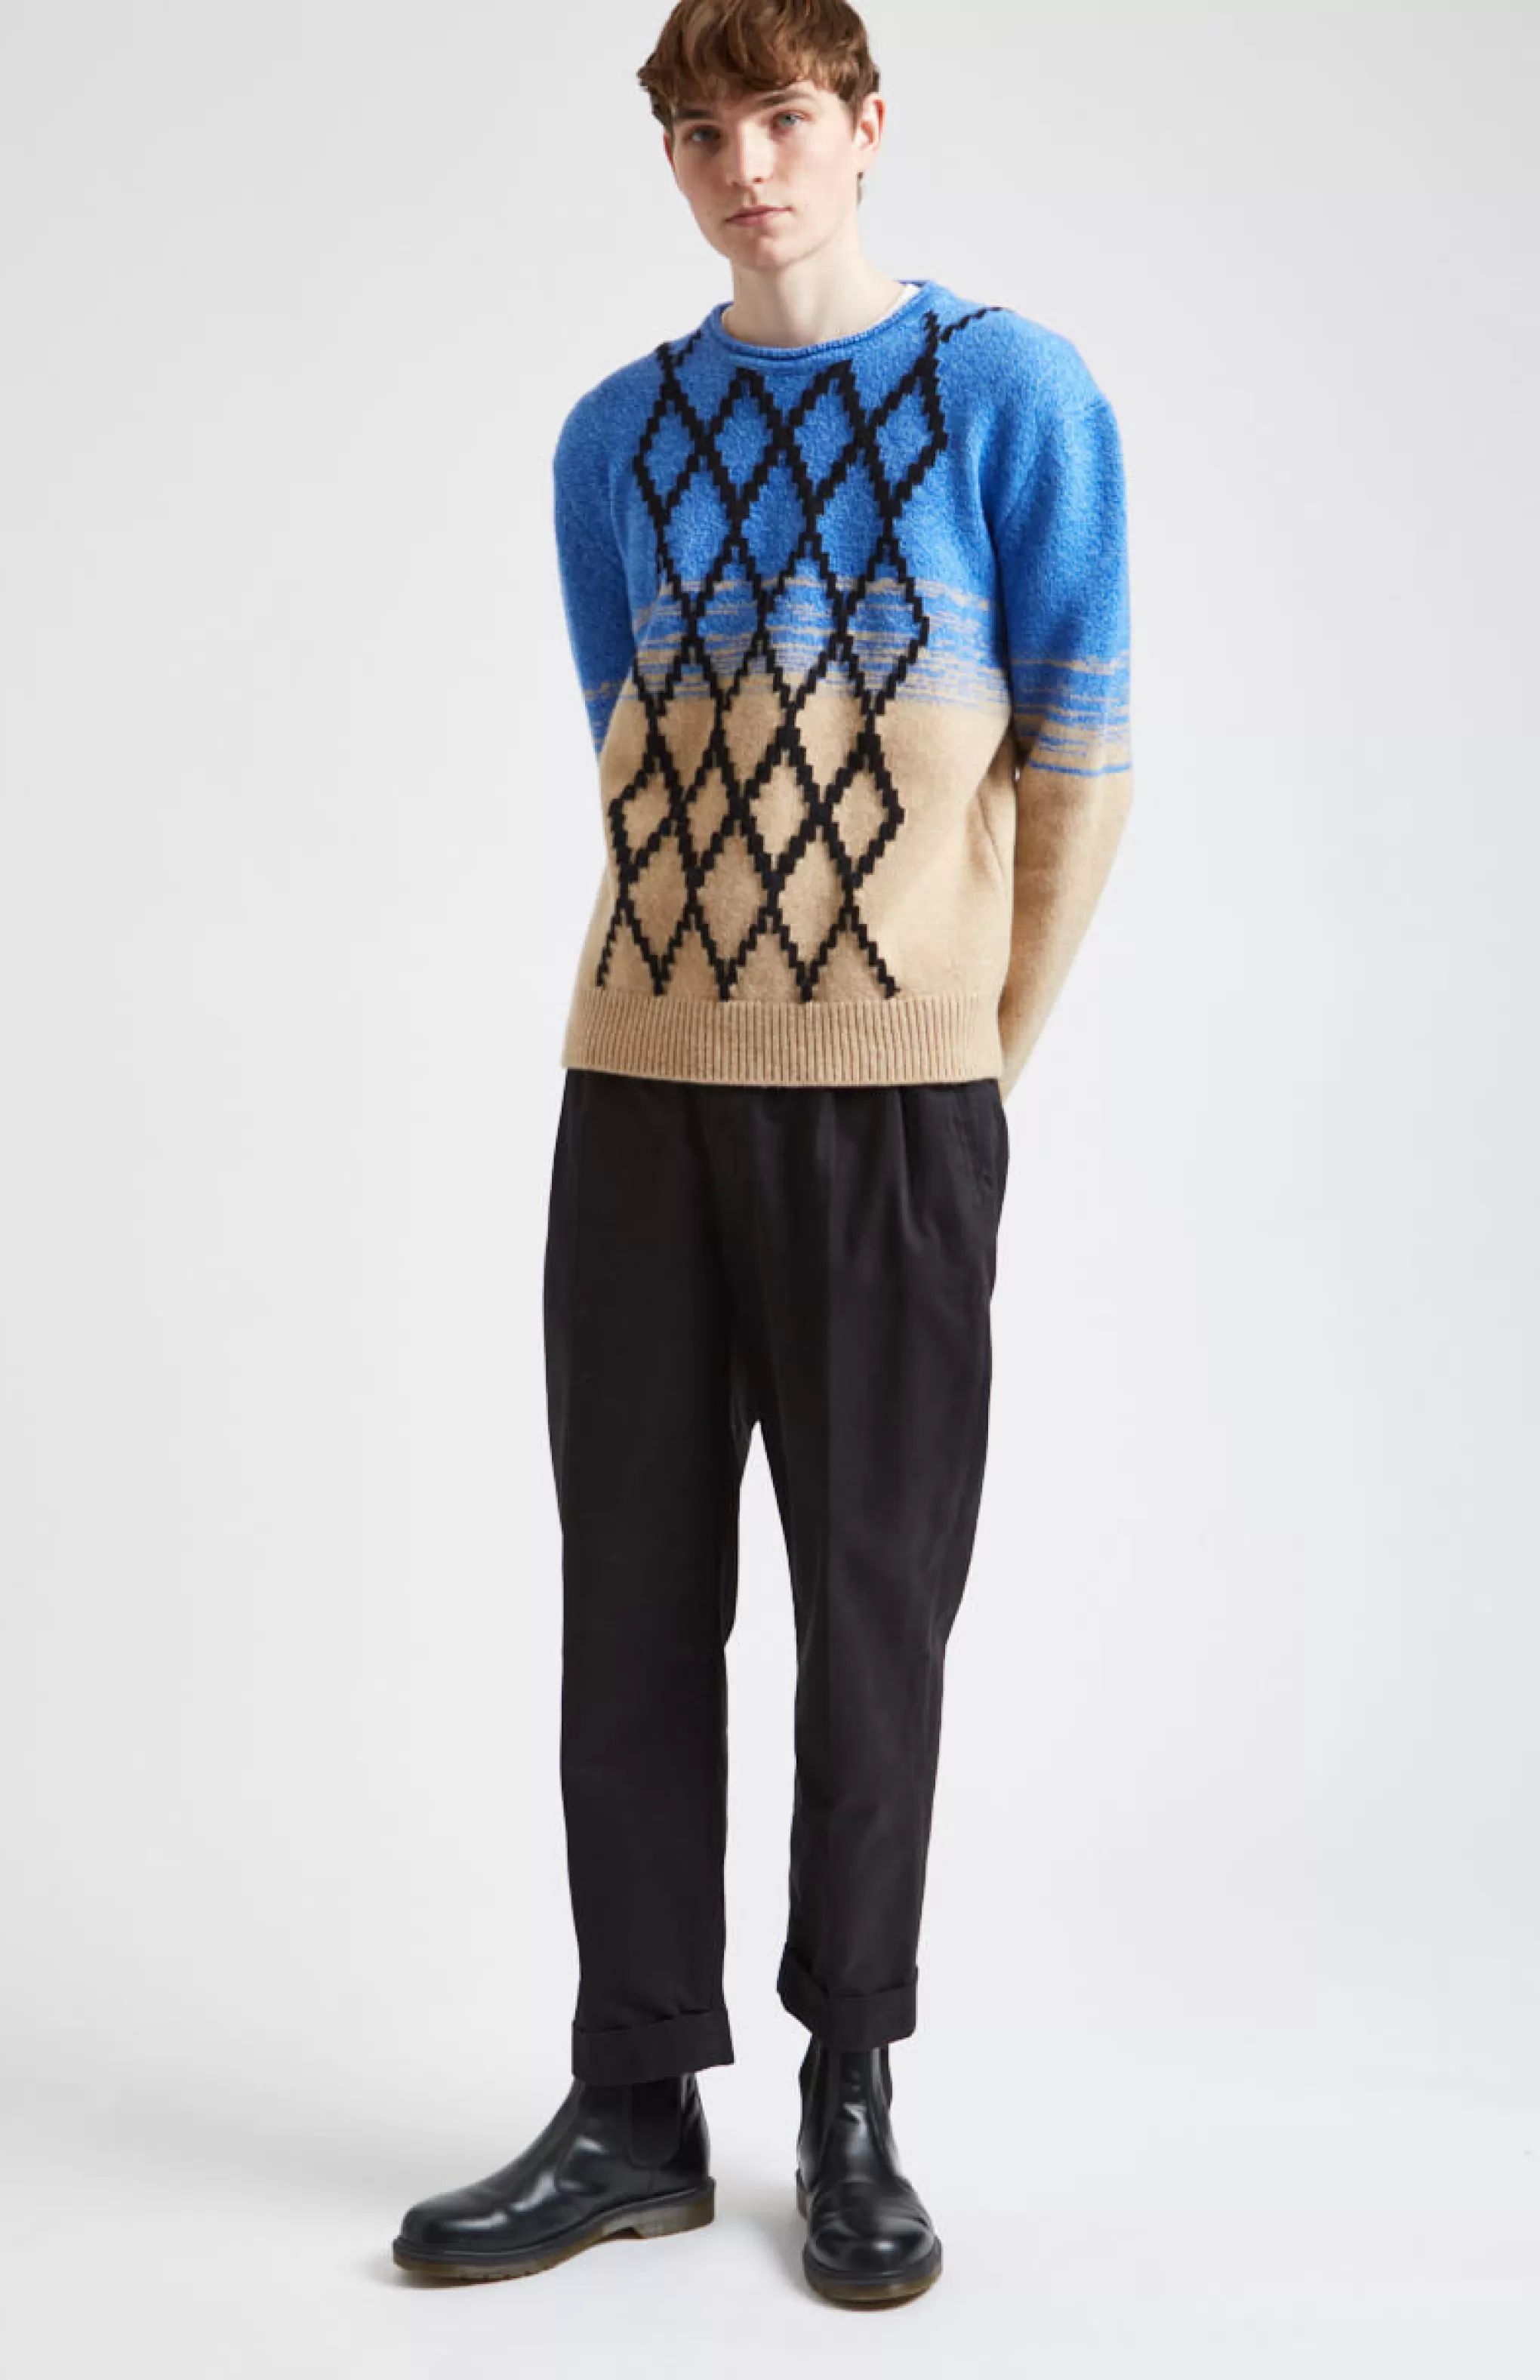 Best Sale Lambswool Round Neck Jumper With Argyle Pattern And Degrade Effect In Cobalt And Camel Men Argyle